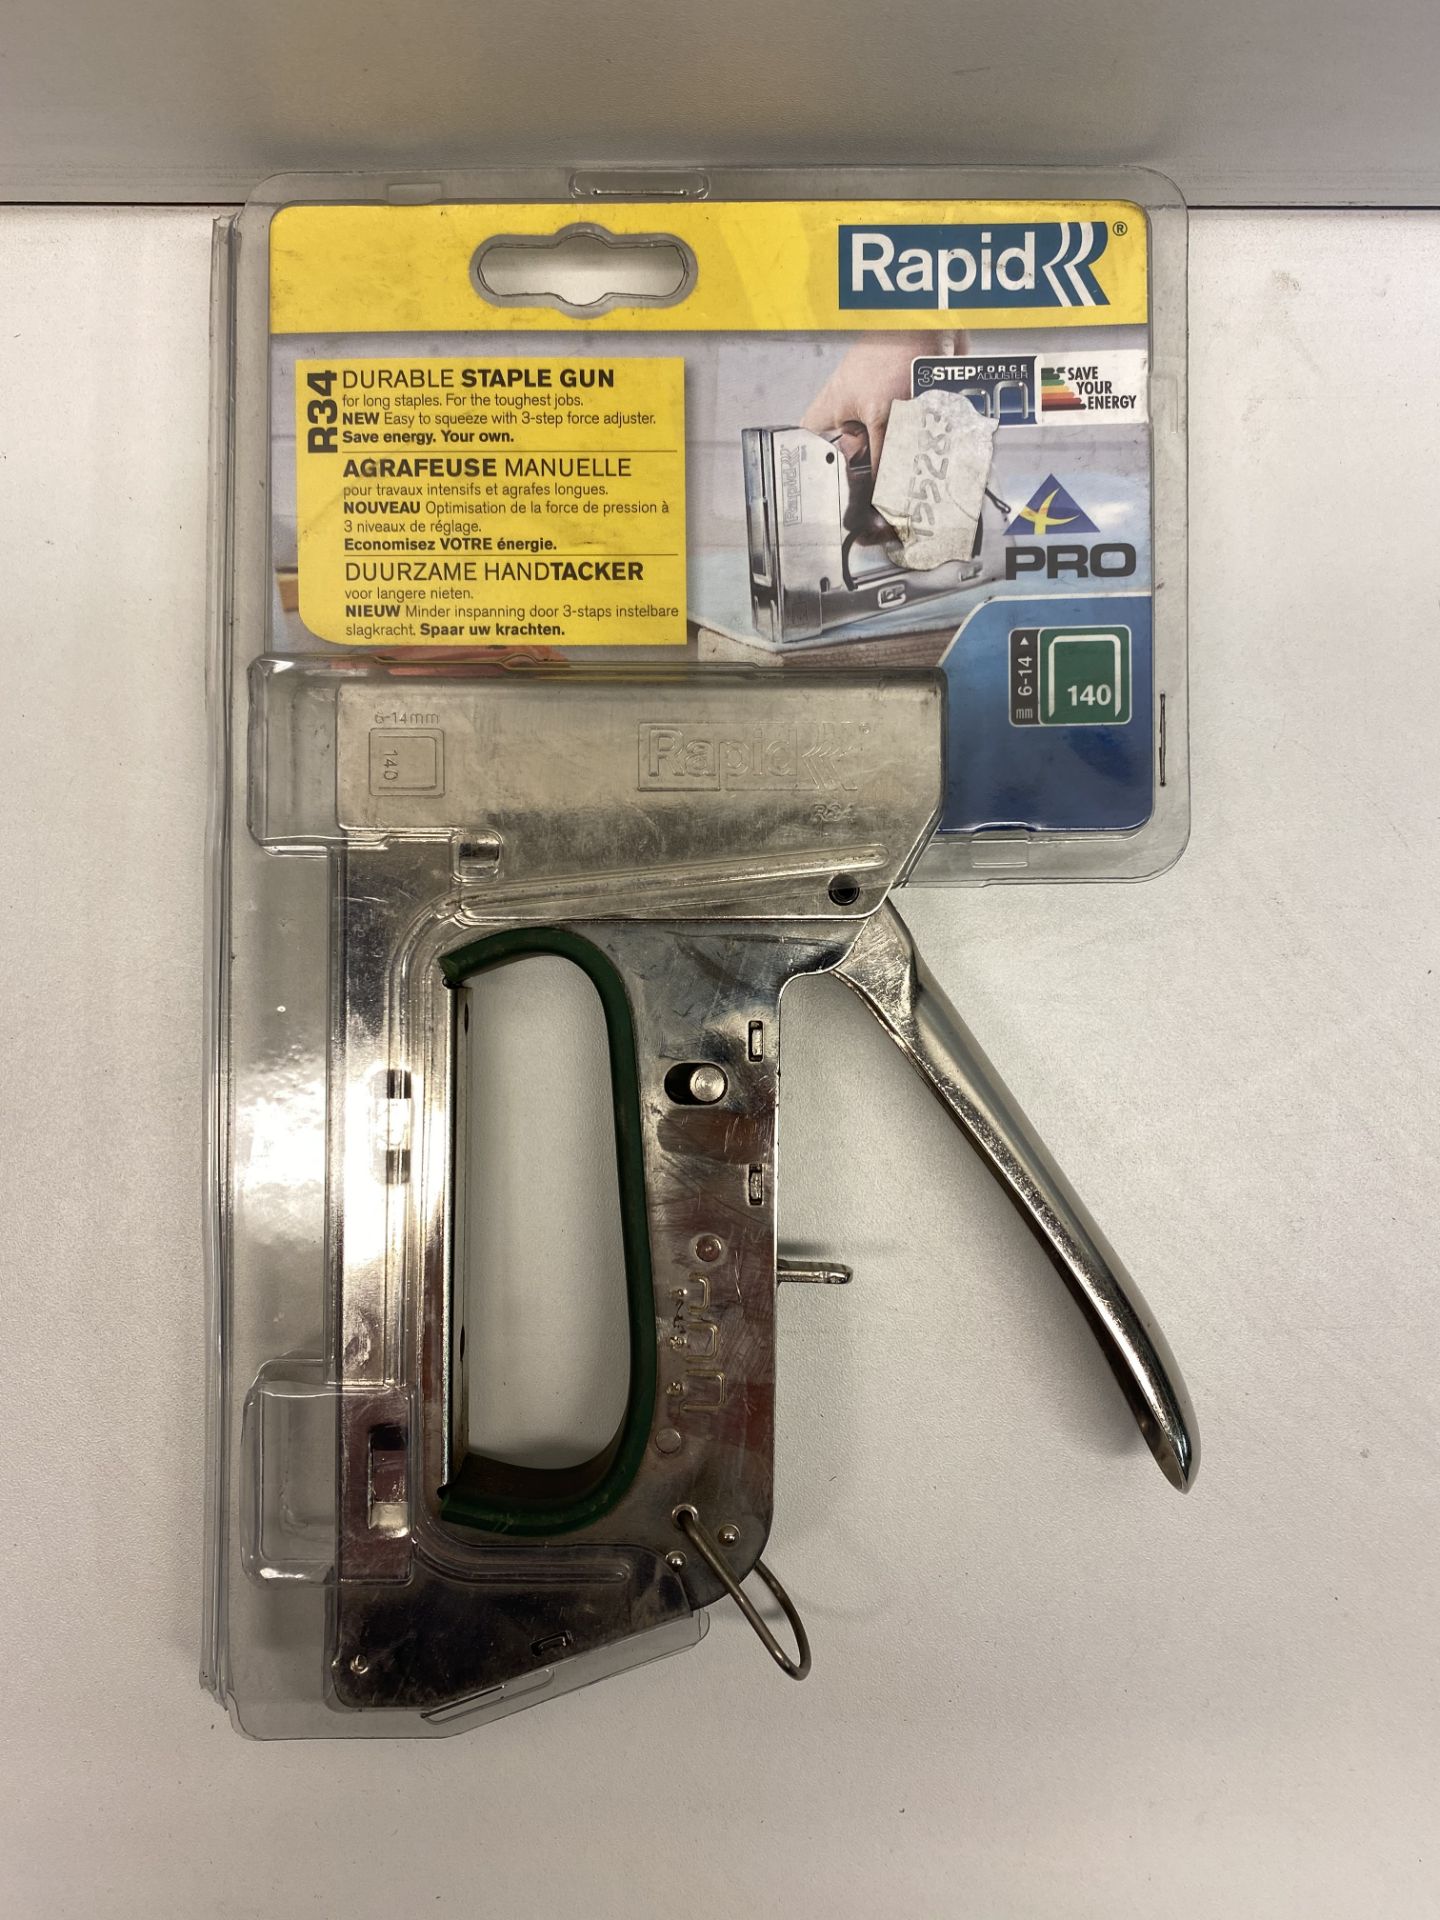 3 x Rapid 20511550 R34 Professional Heavy-Duty Hand Tacker | Total RRP £74.94 - Image 2 of 3